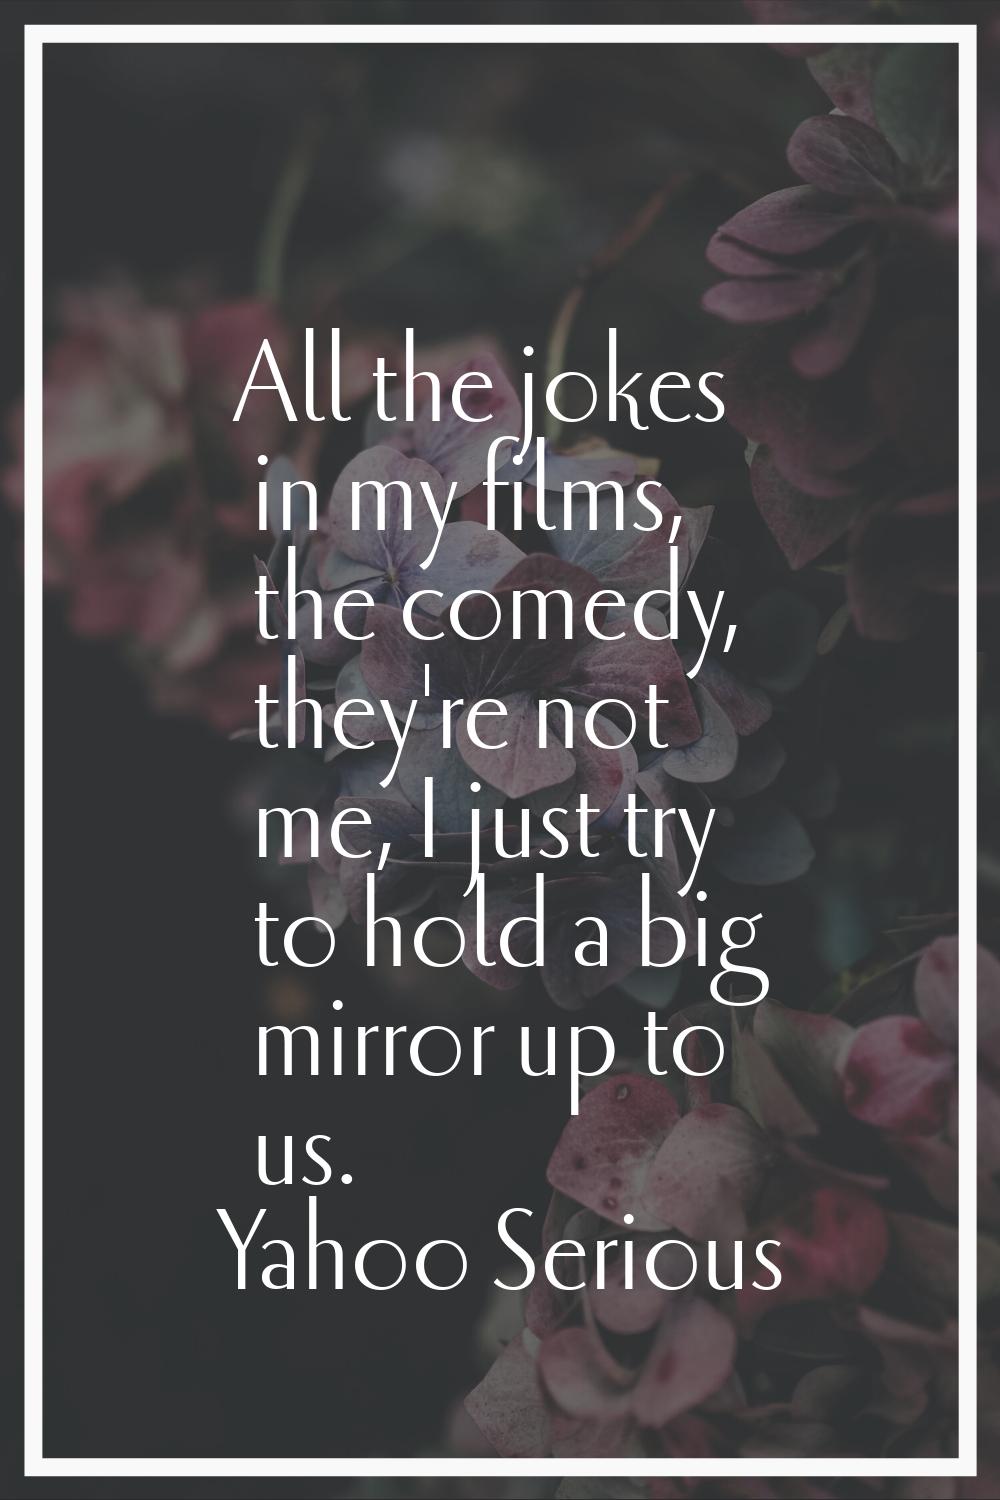 All the jokes in my films, the comedy, they're not me, I just try to hold a big mirror up to us.